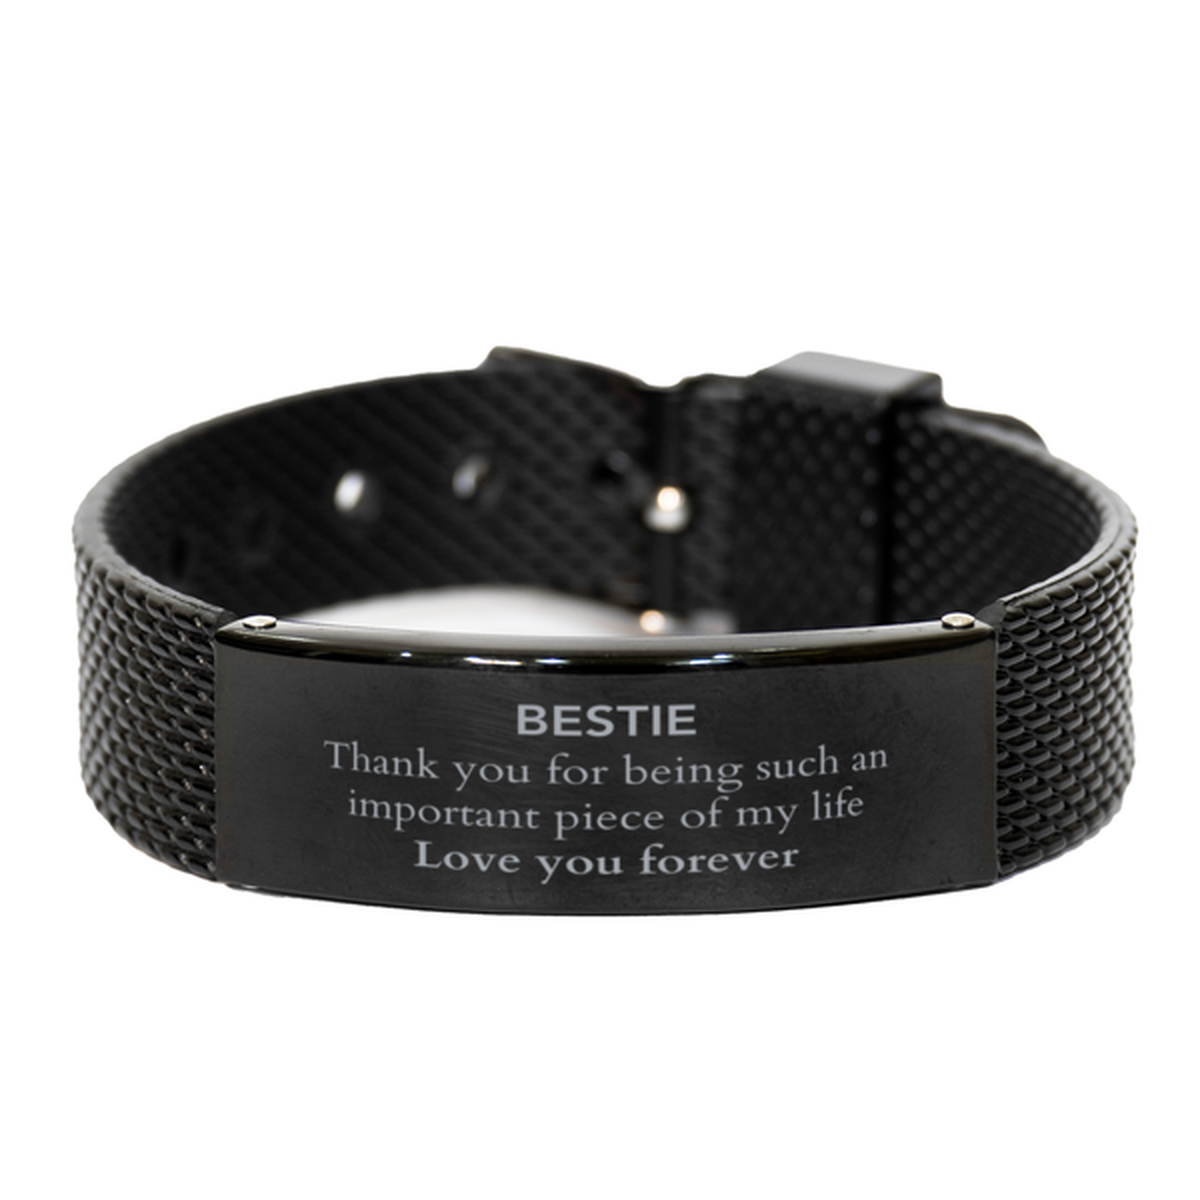 Appropriate Bestie Black Shark Mesh Bracelet Epic Birthday Gifts for Bestie Thank you for being such an important piece of my life Bestie Christmas Mothers Fathers Day